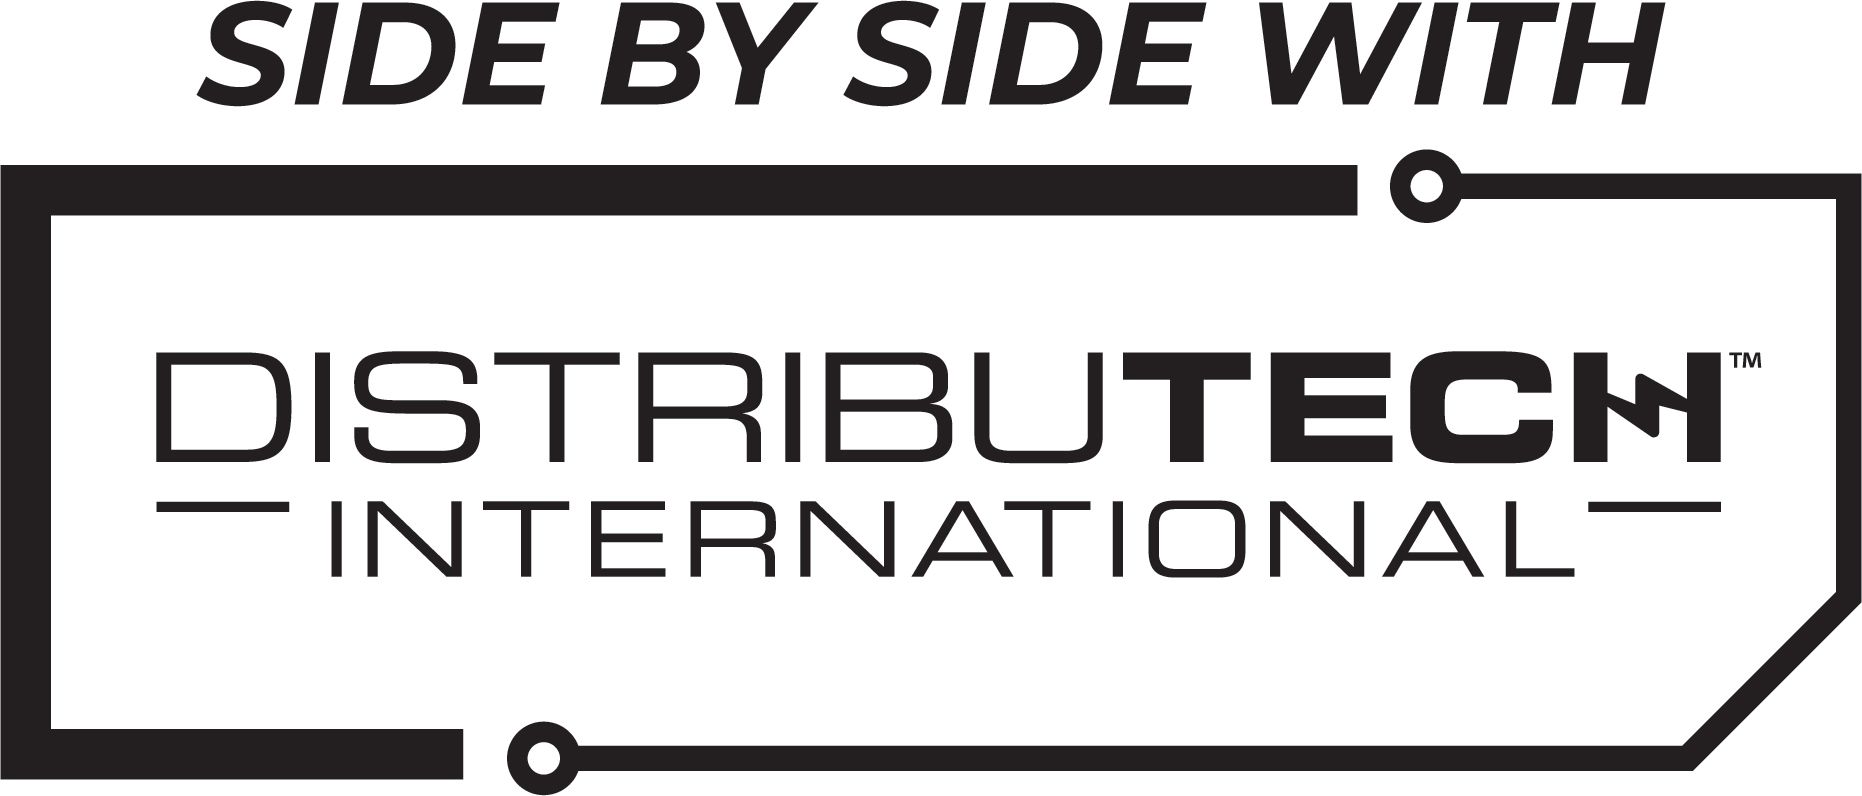 side by side with DISTRIBUTECH International